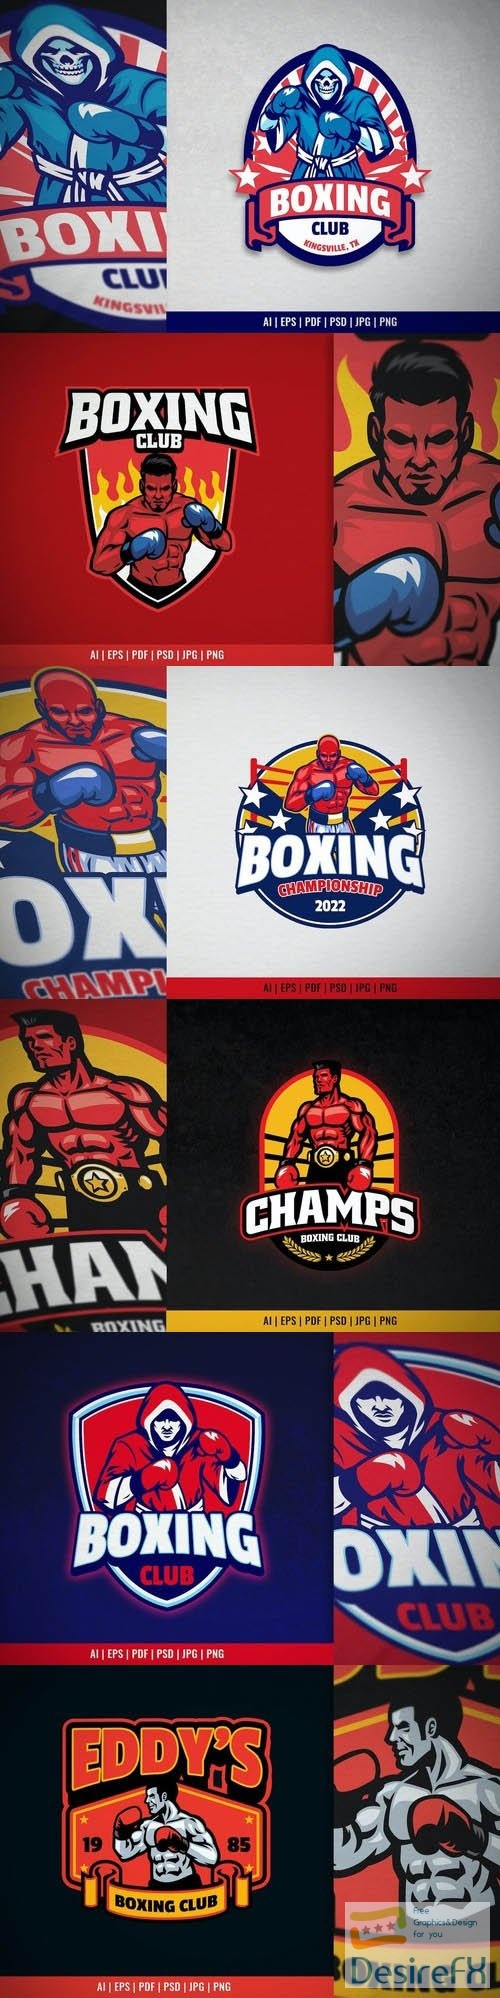 Boxer Mascot for Boxing Club Logo in Vintage